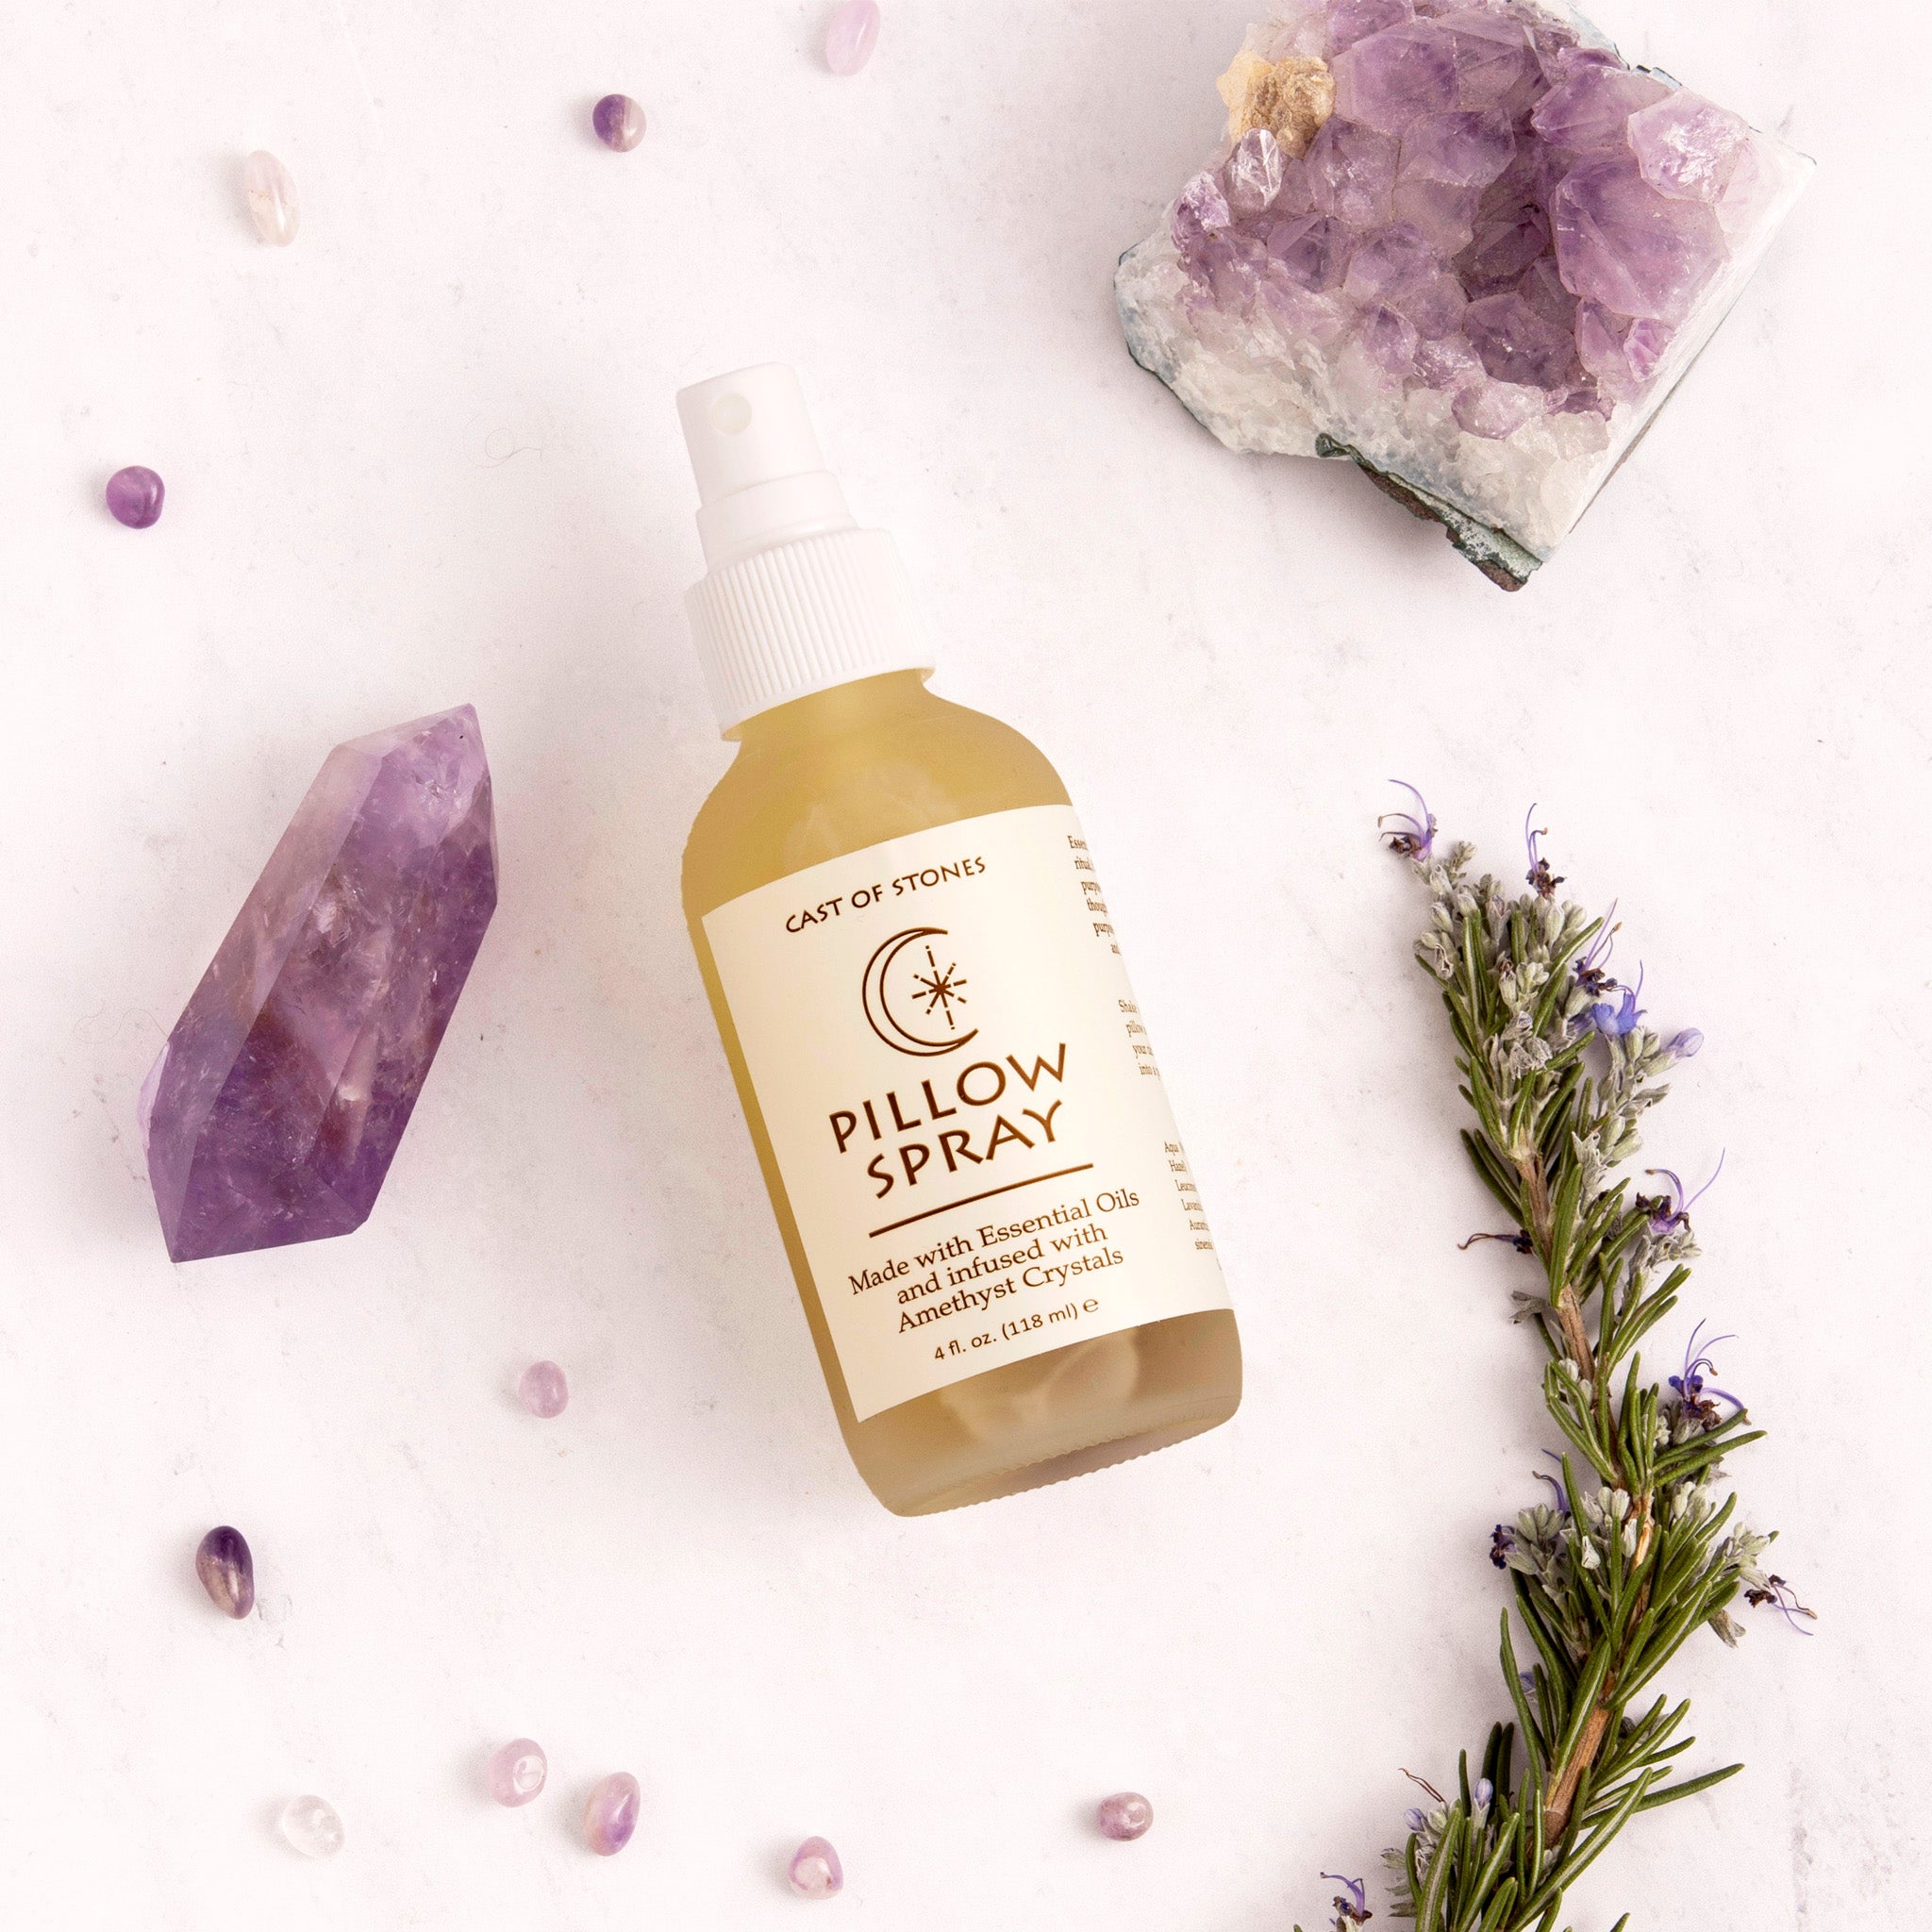 Pillow Spray with Amethyst Crystals